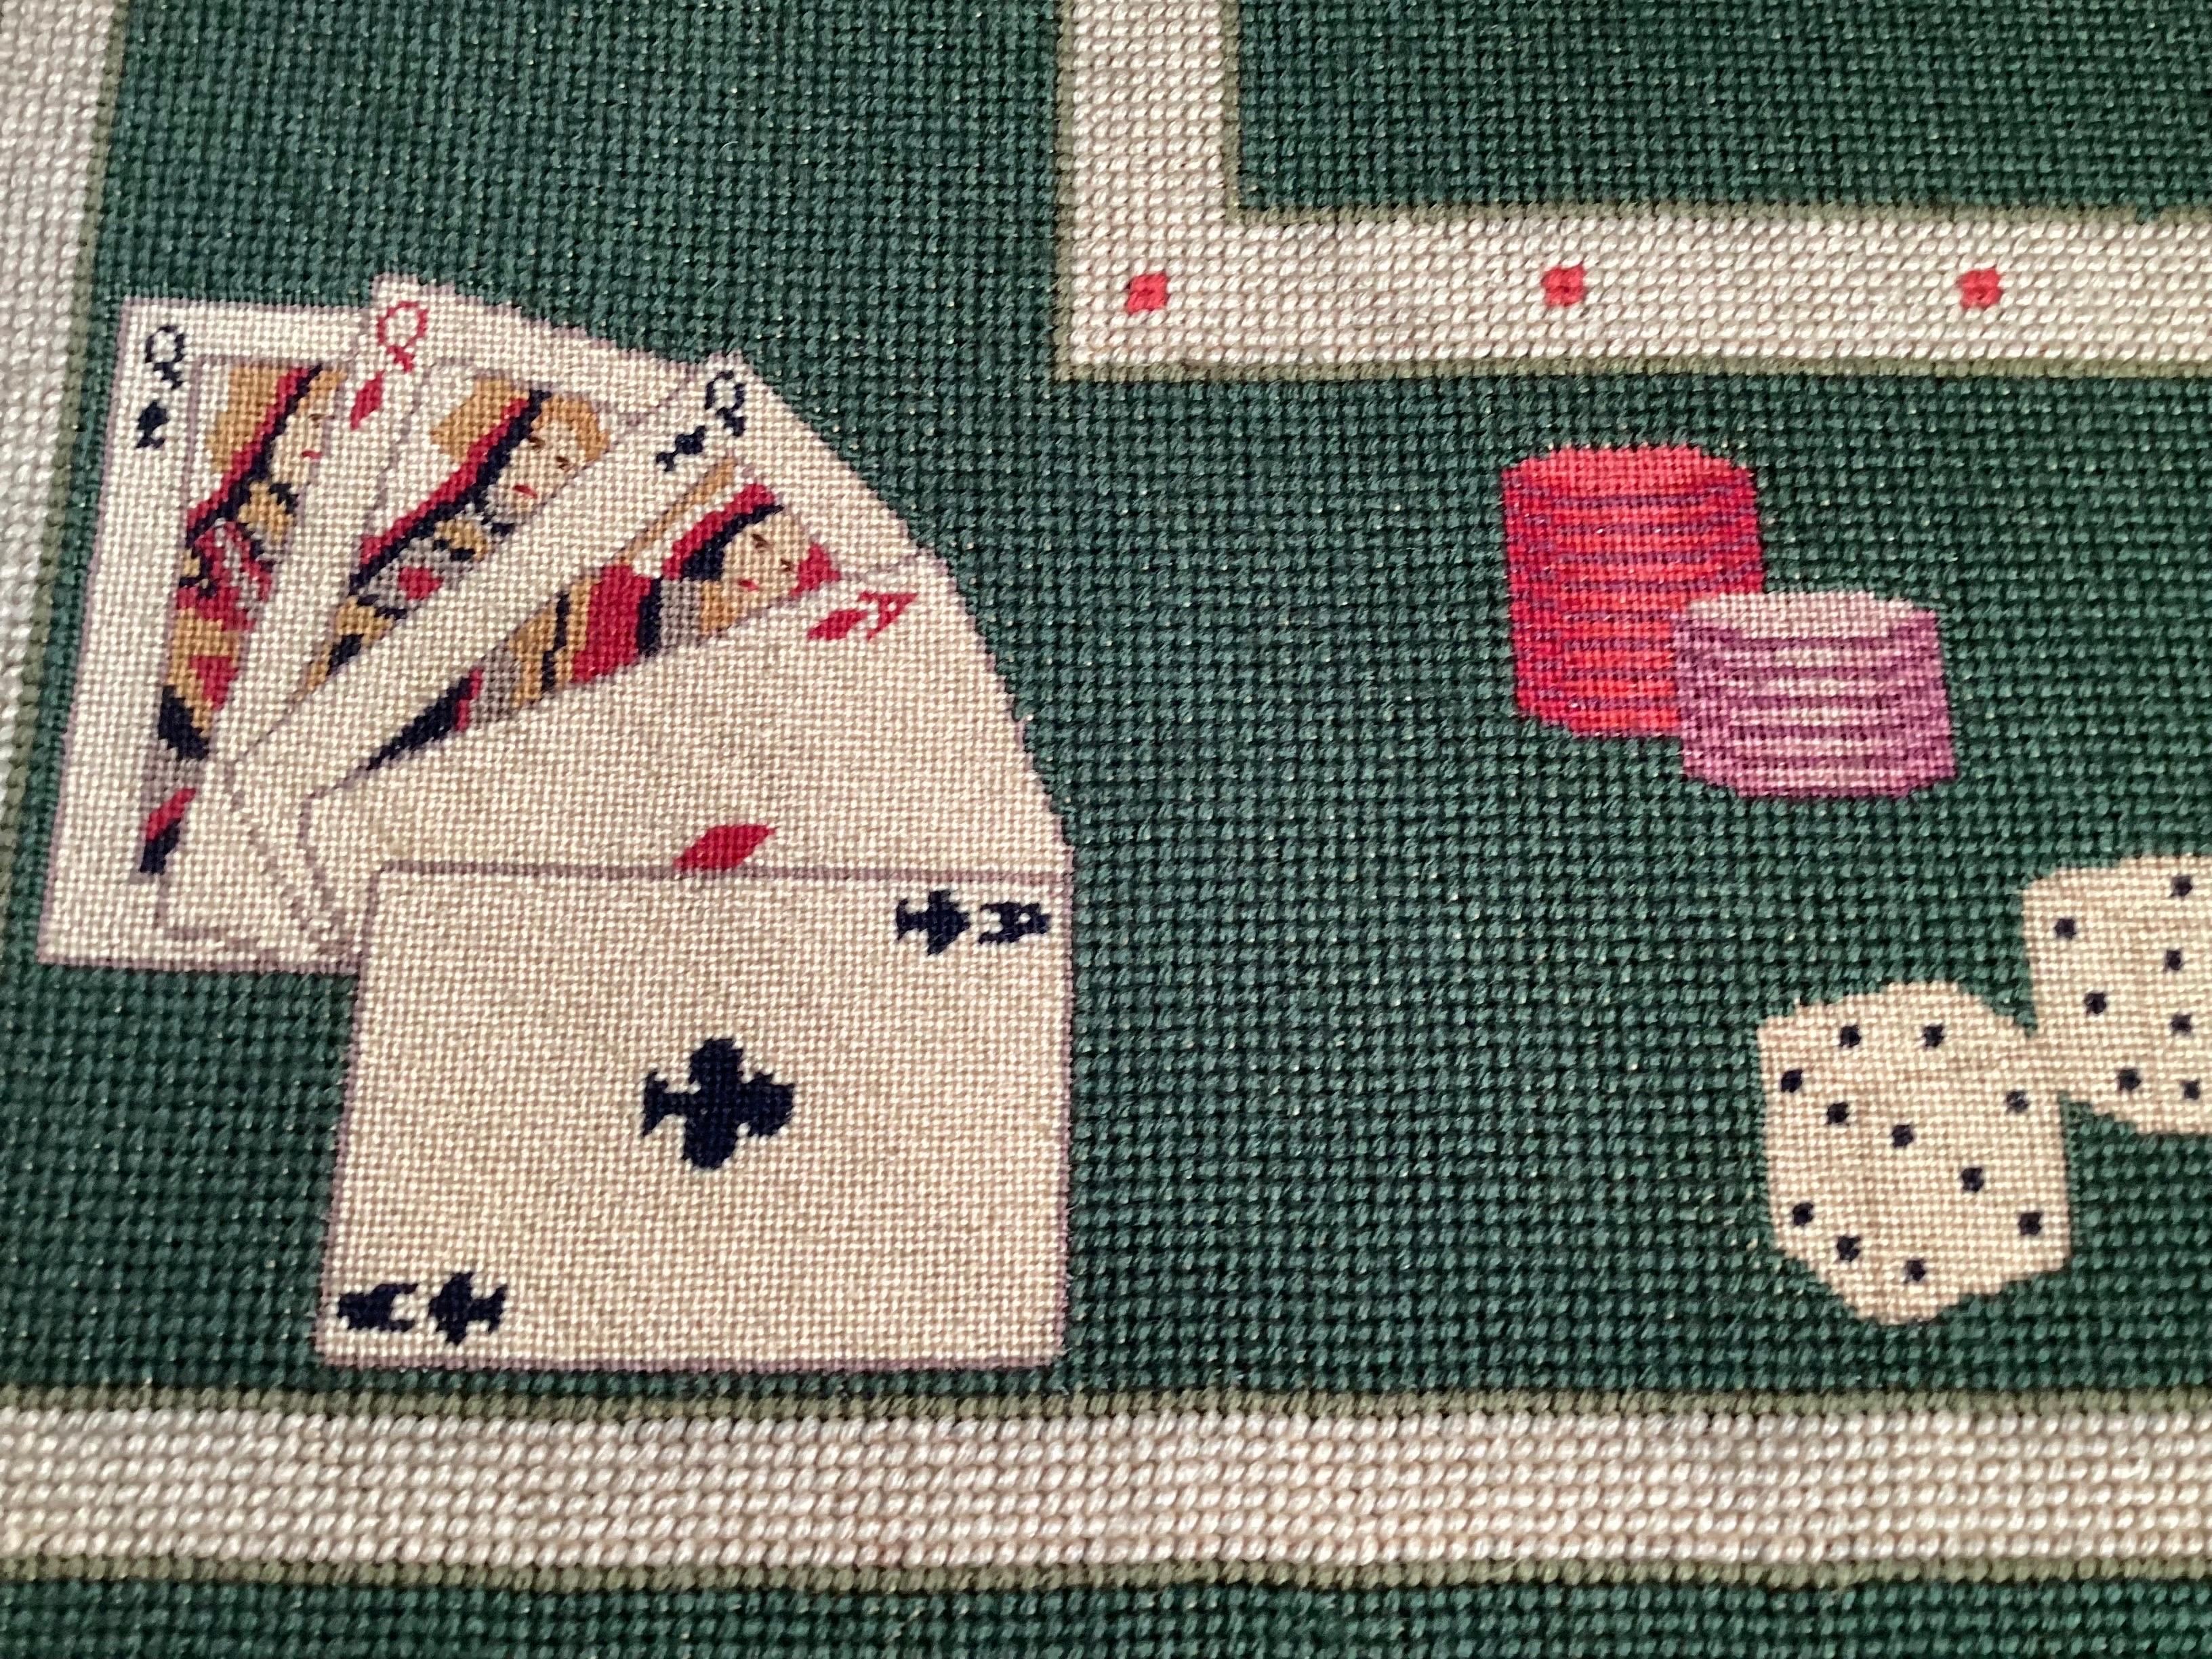 A whimsical wool needlepoint framed table cover with a gambling and sporting theme. The green background with cards, horses, dice and poker chips framed all along the center. There is some signs of age and at one corner a thin spot to the wool.